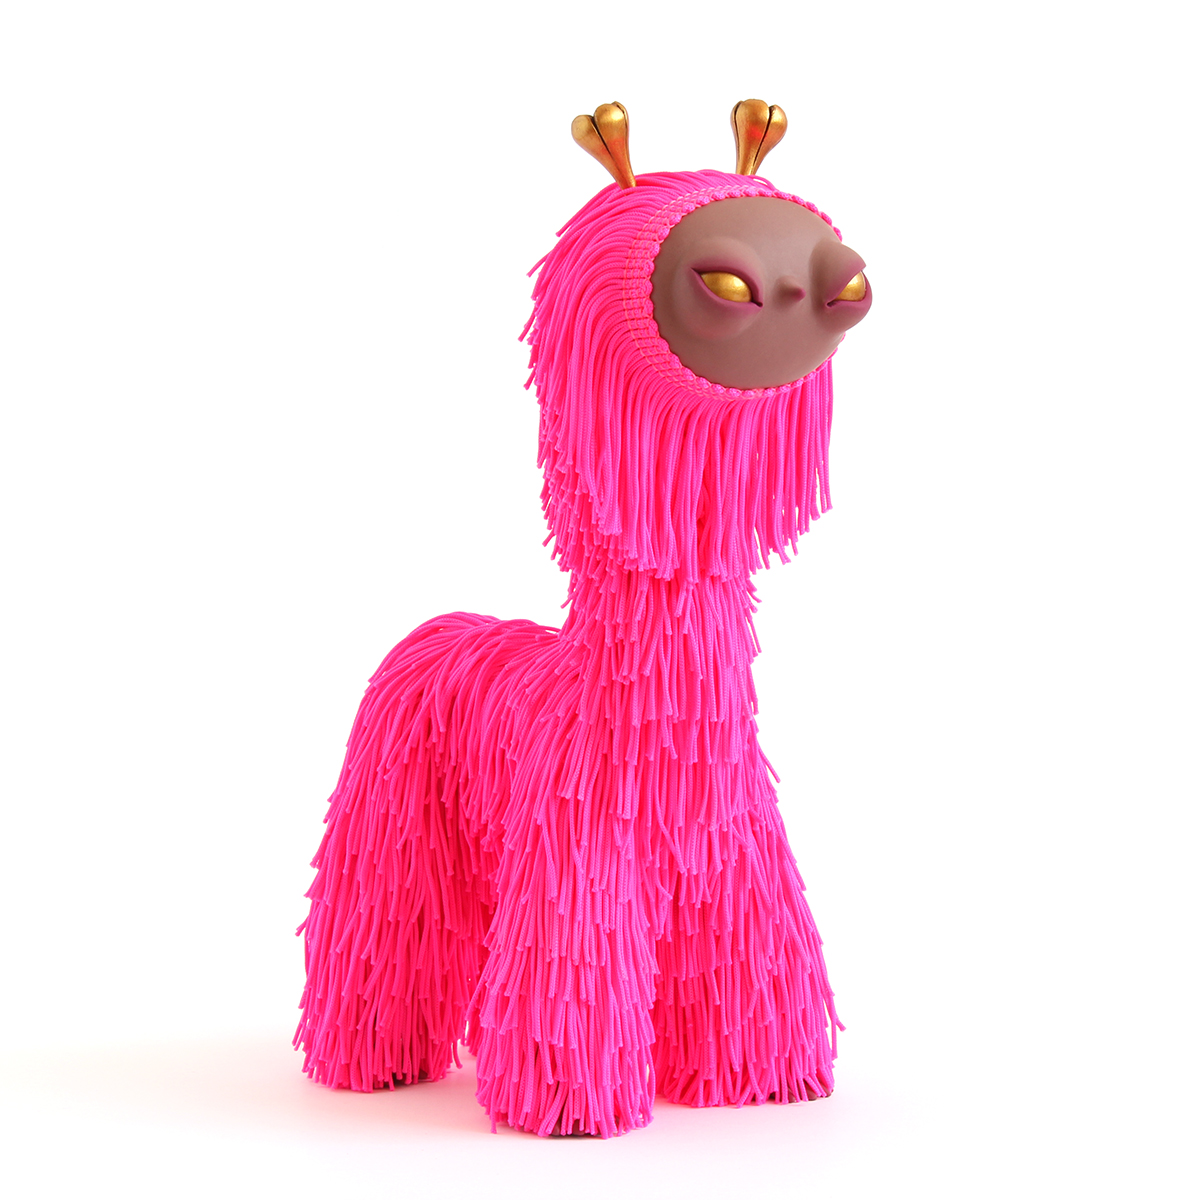 Neon pink polymer clay and fabric fringe creature sculpture